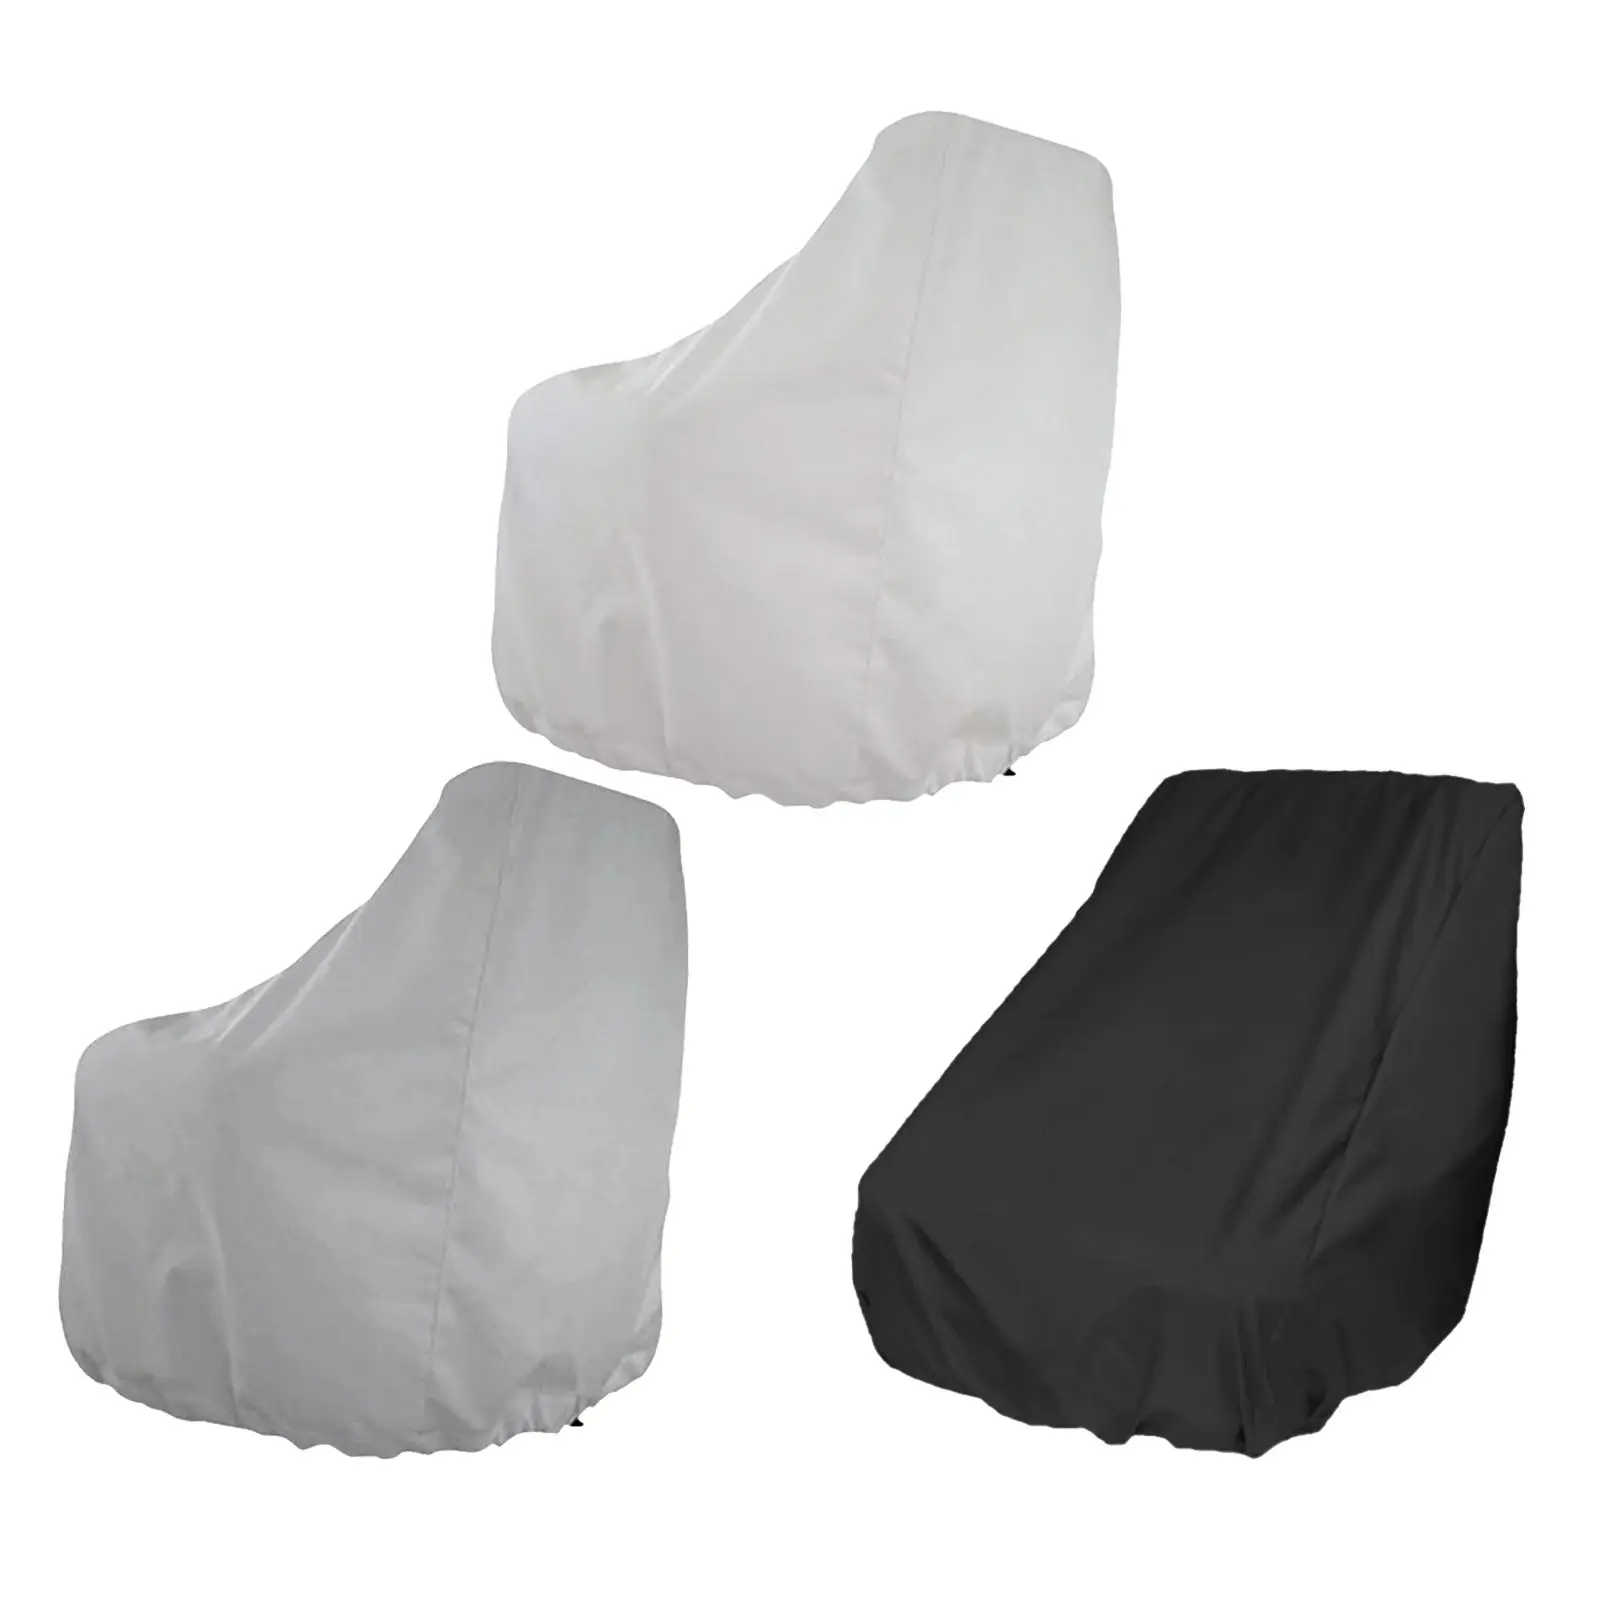 Outdoor Boat Seat Cover Ship Foldable UV Resistant Yacht Captain Chair Elastic Closure Dust Protective Covers